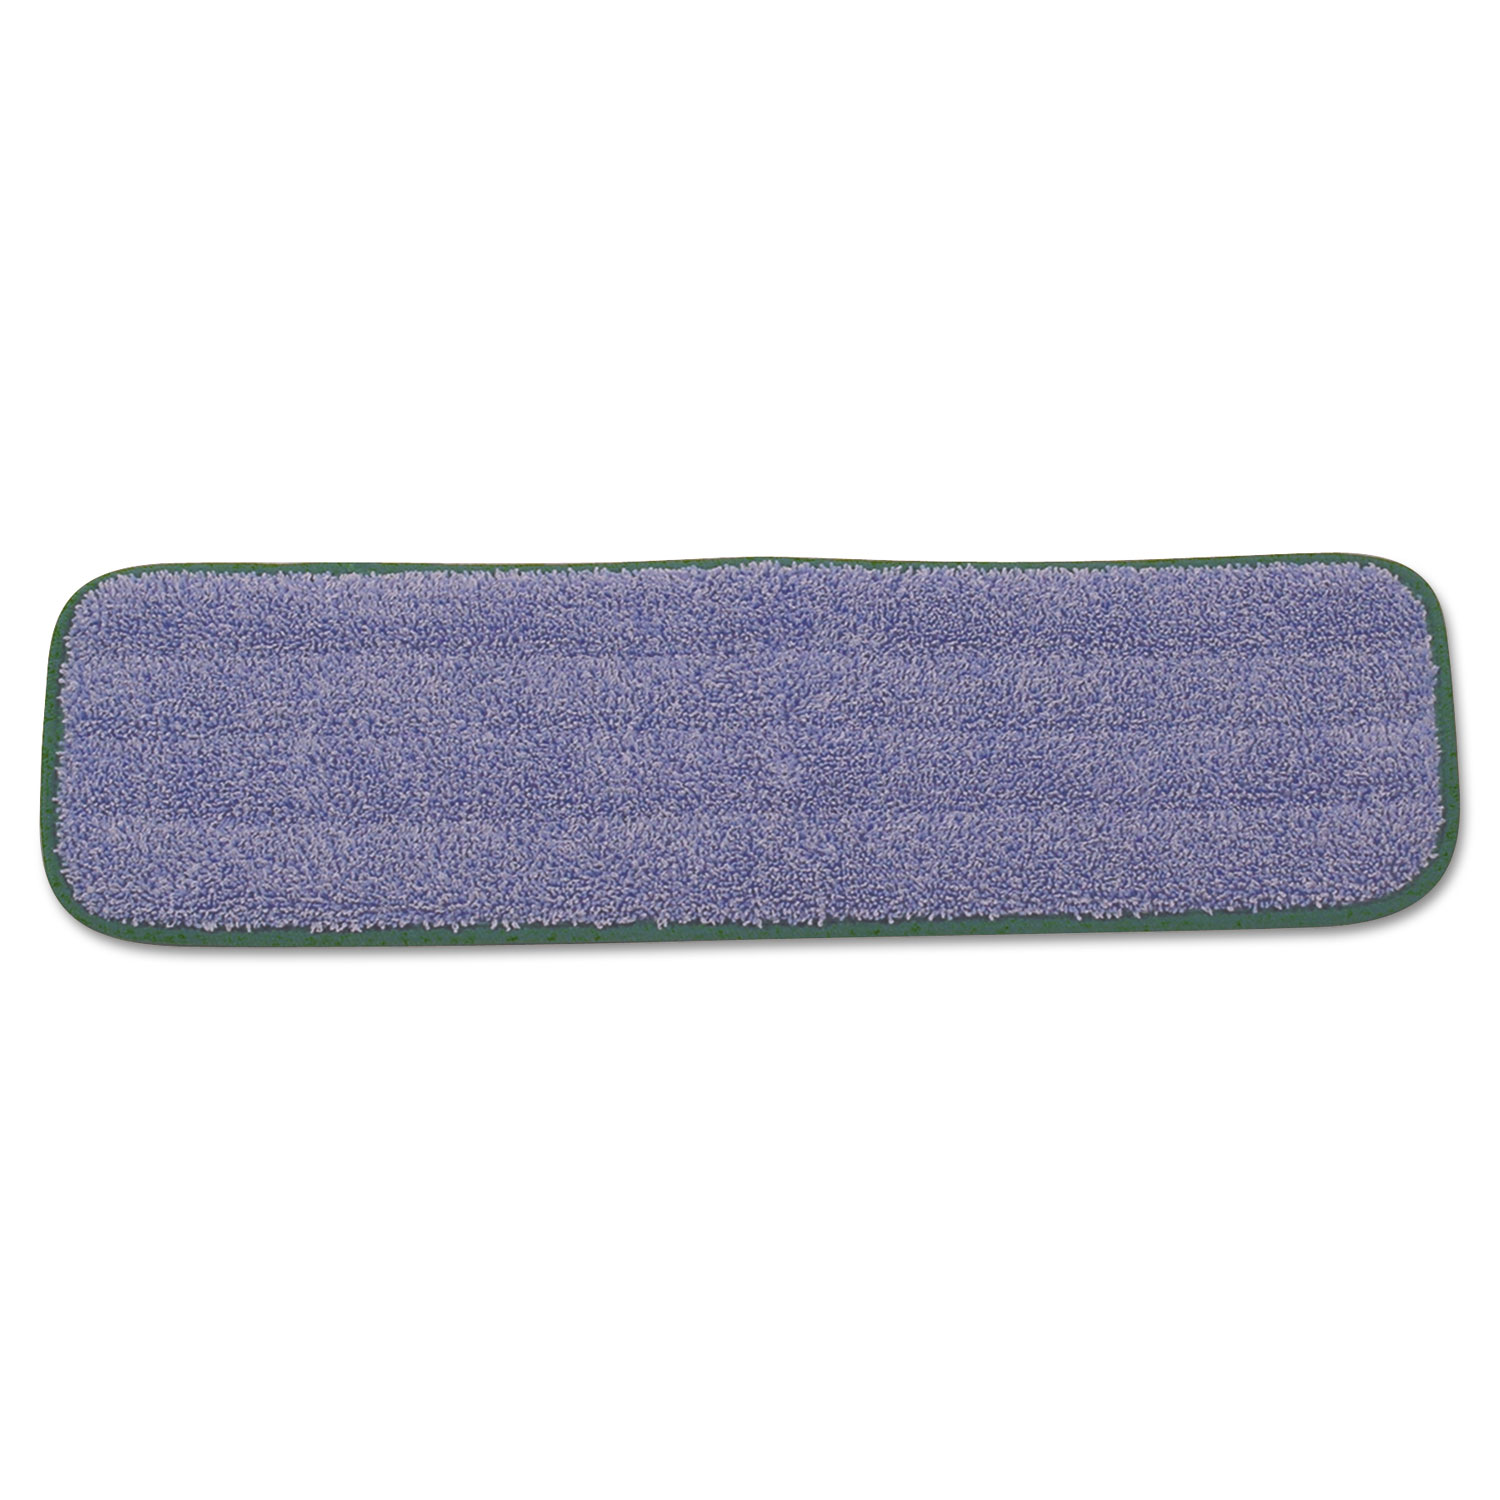  Rubbermaid Commercial FGQ41000GR00 Microfiber Wet Mopping Pad, 18 1/2 x 5 1/2 x 1/2, Green, 12/Carton (RCPQ410GRECT) 